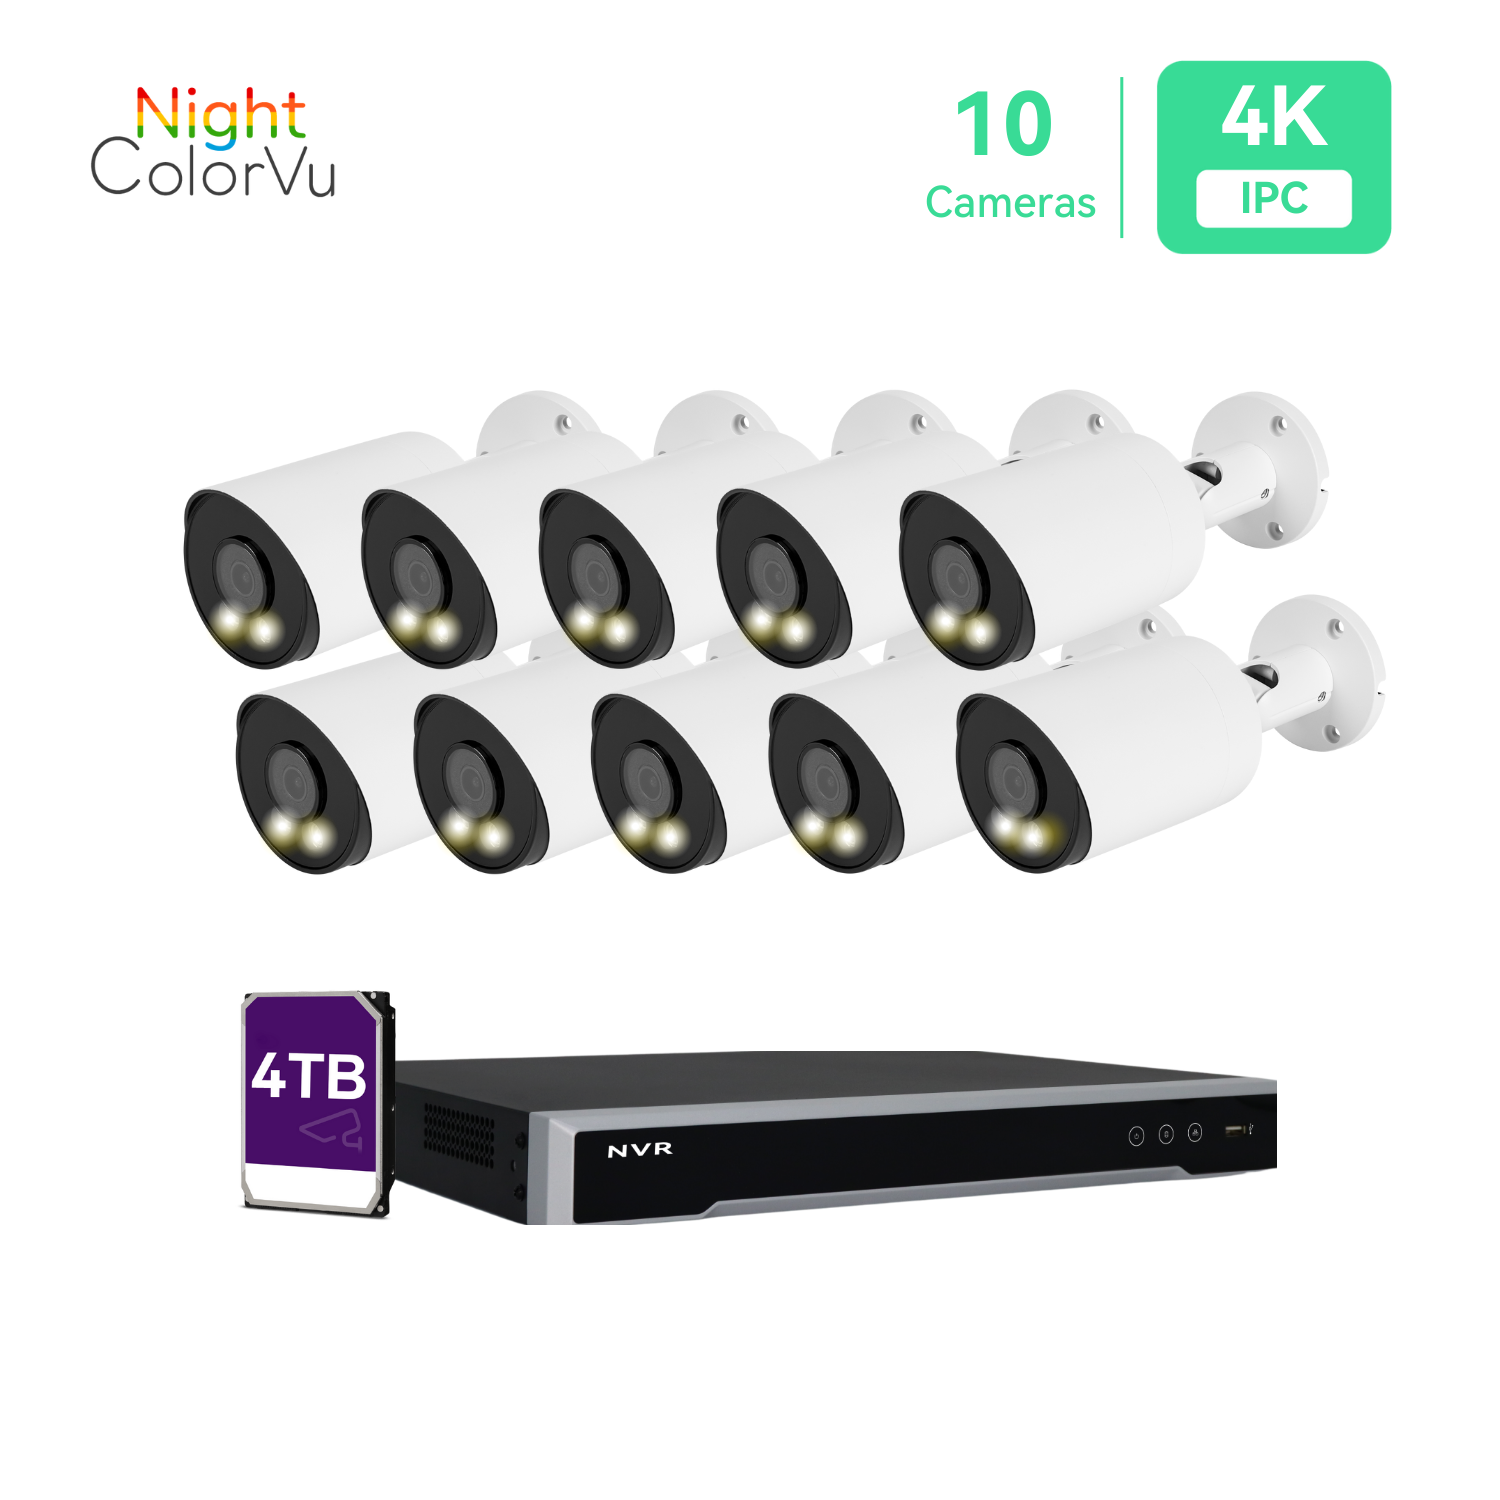 16CH PoE IP Camera System with (10) 4K Night Color Vision Cameras, 4TB HDD